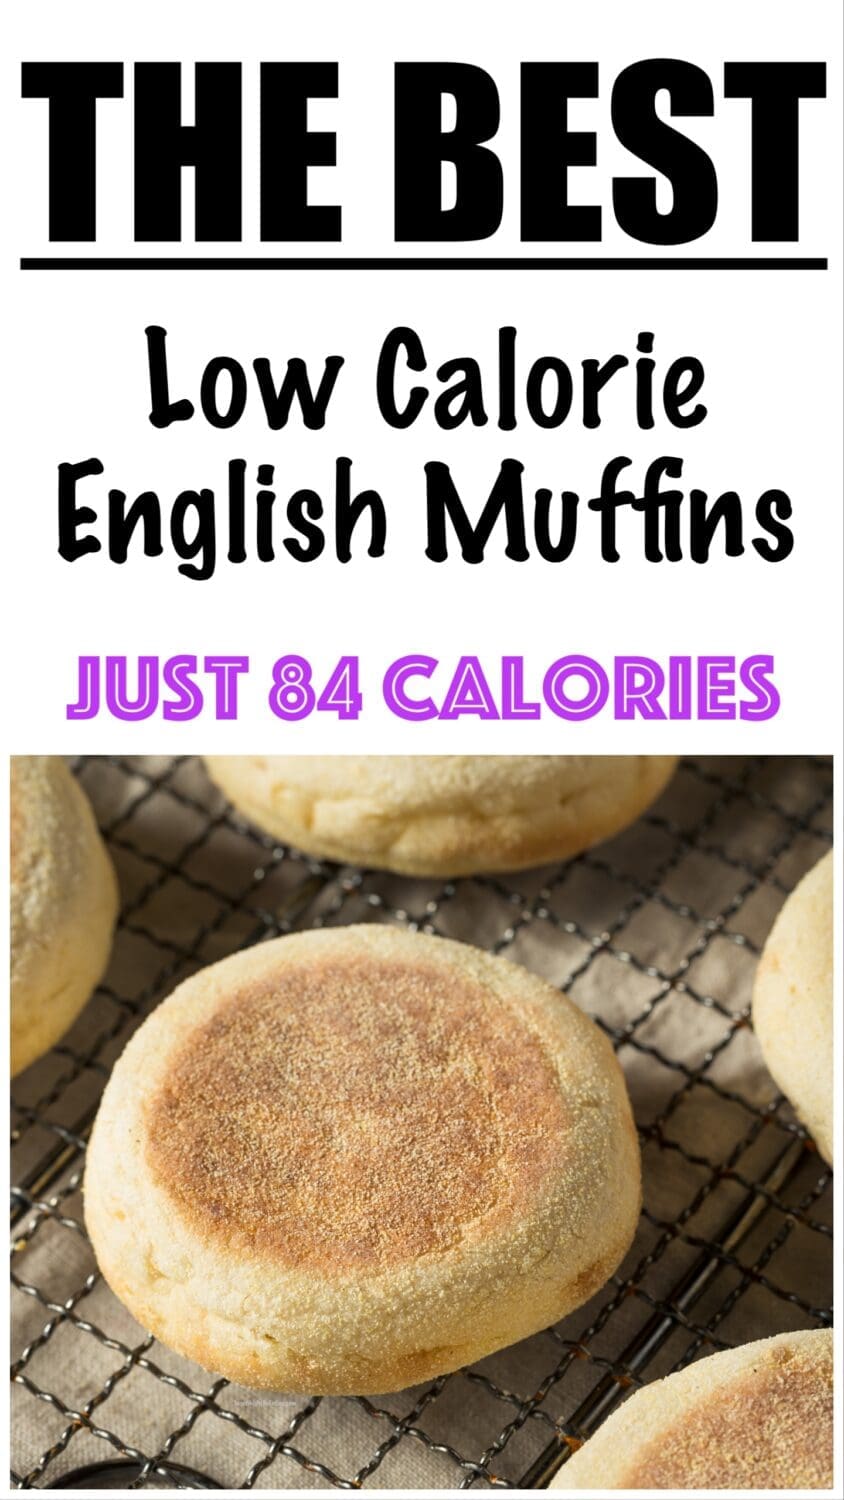 Low Calorie English Muffins Recipe